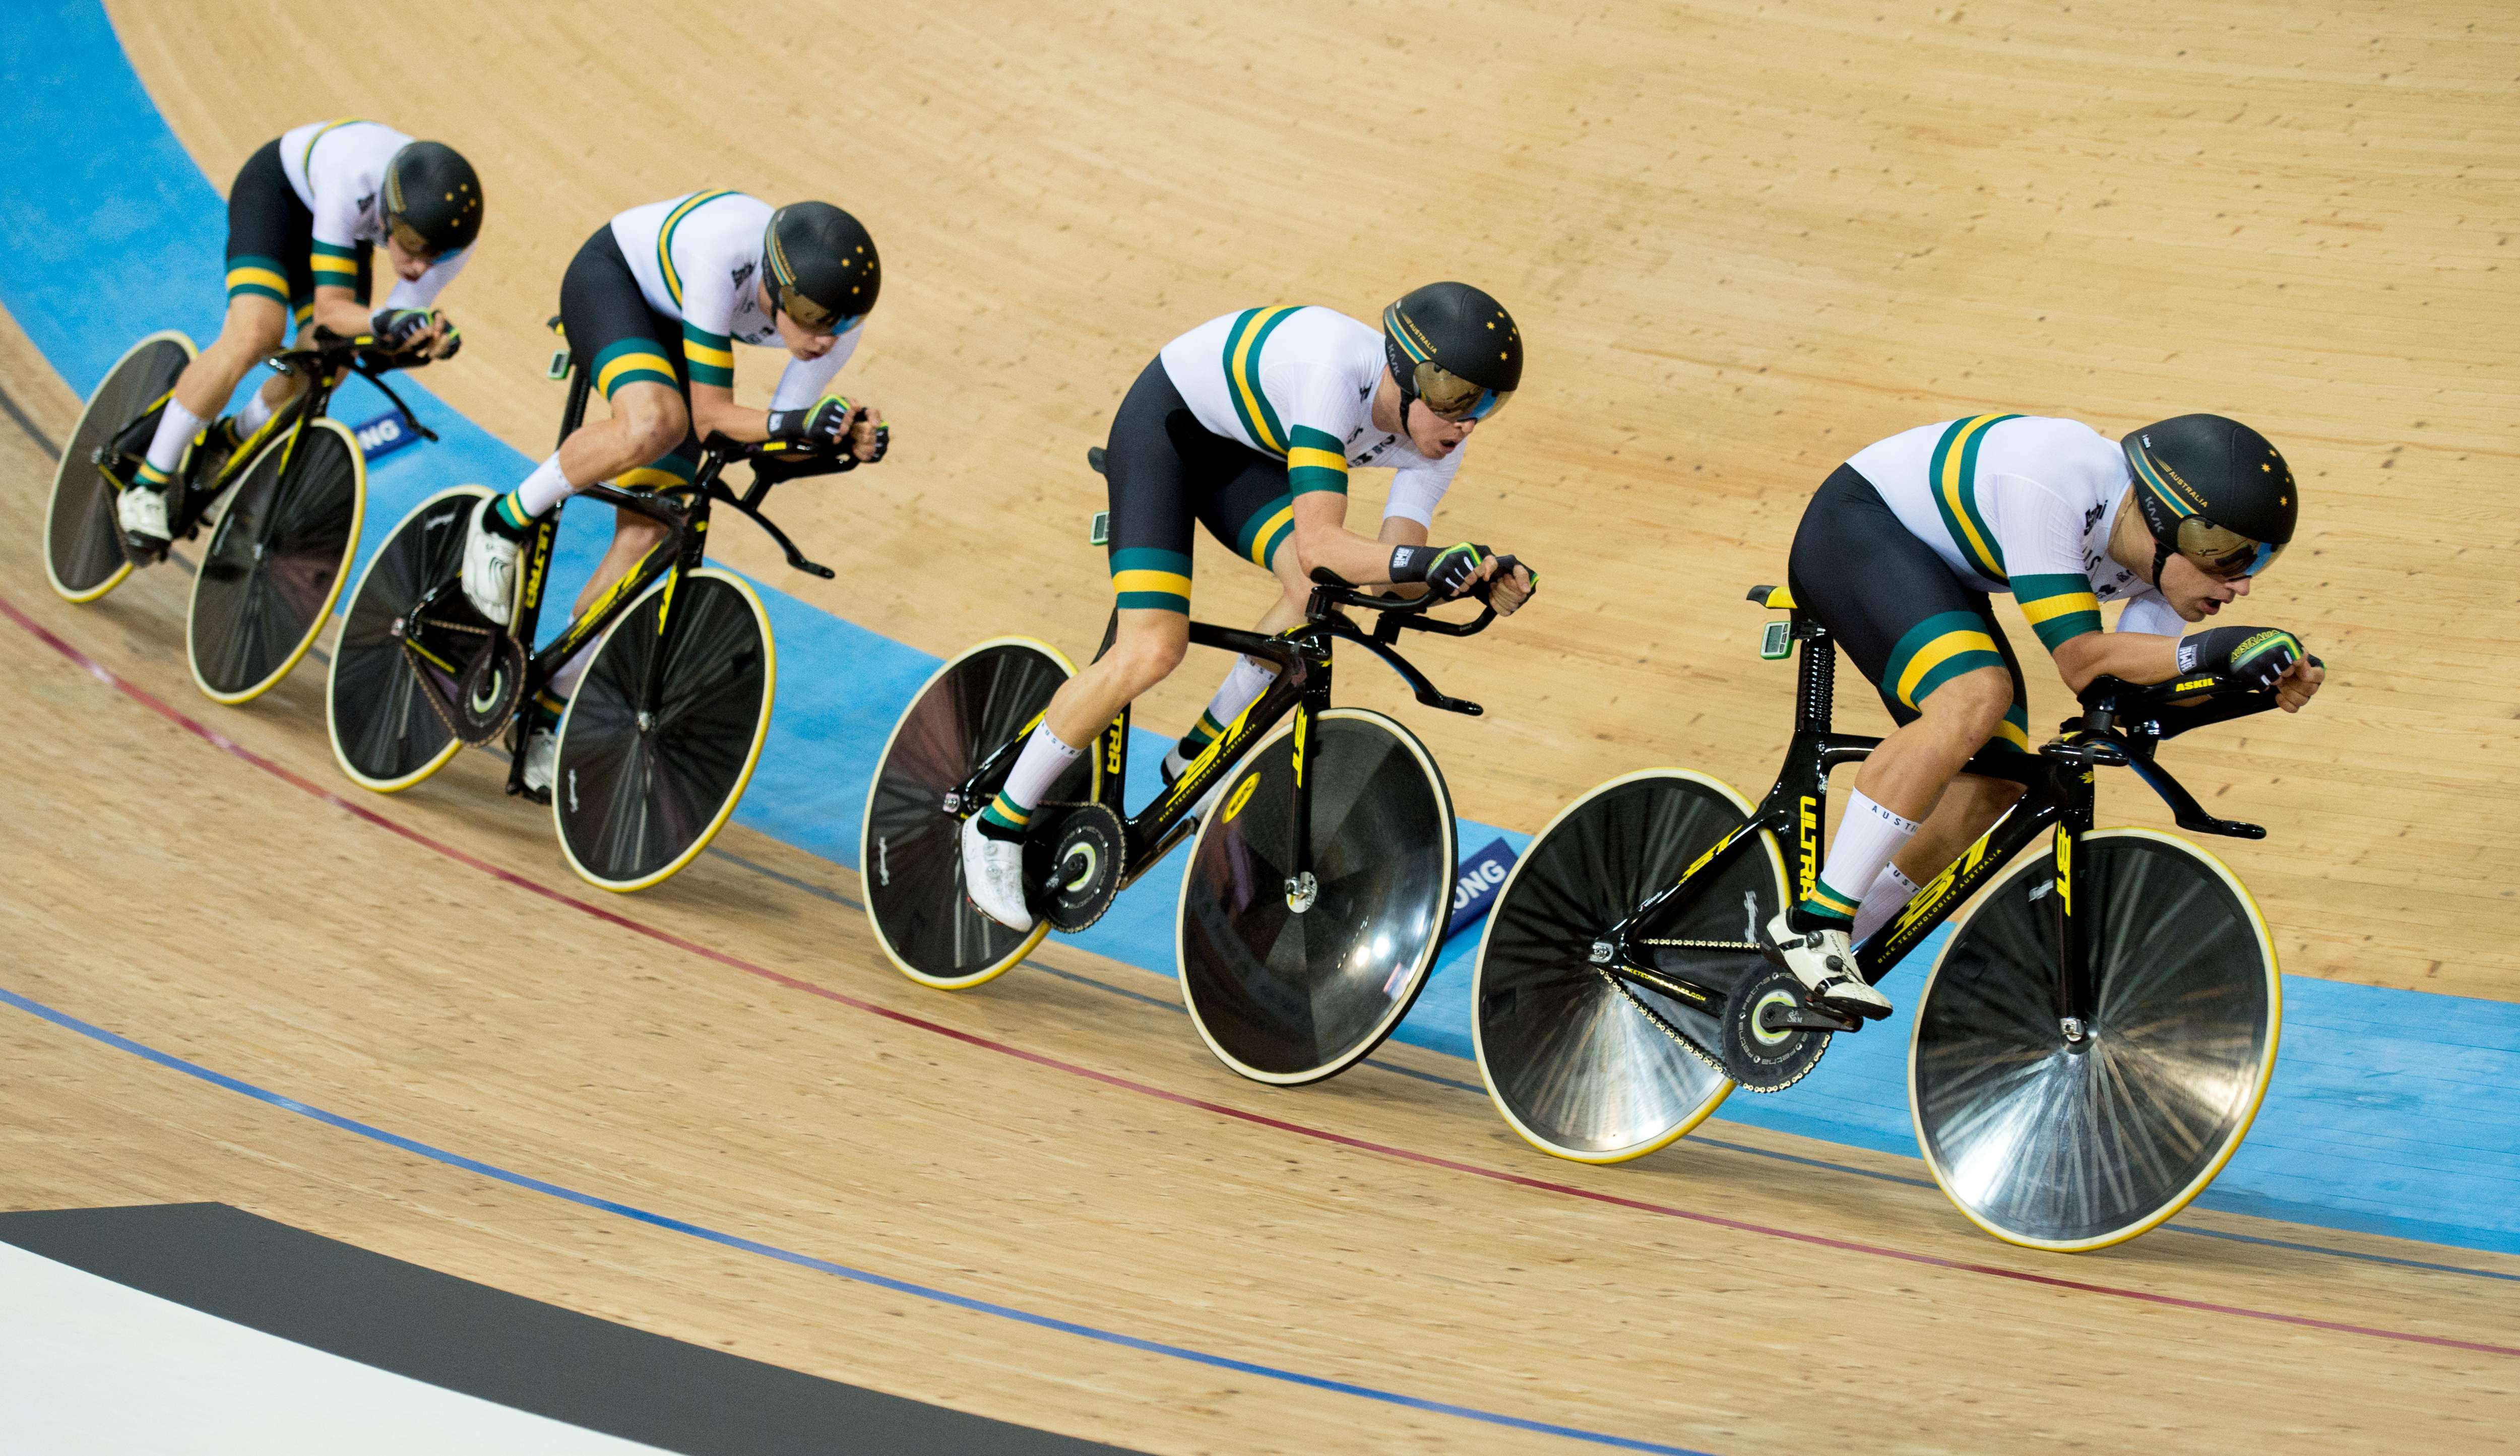 Hong Kong rider unable to get near the medals on the first day of the UCI Track Cycling World Championships as Australia almost break the world record in the men’s team pursuit